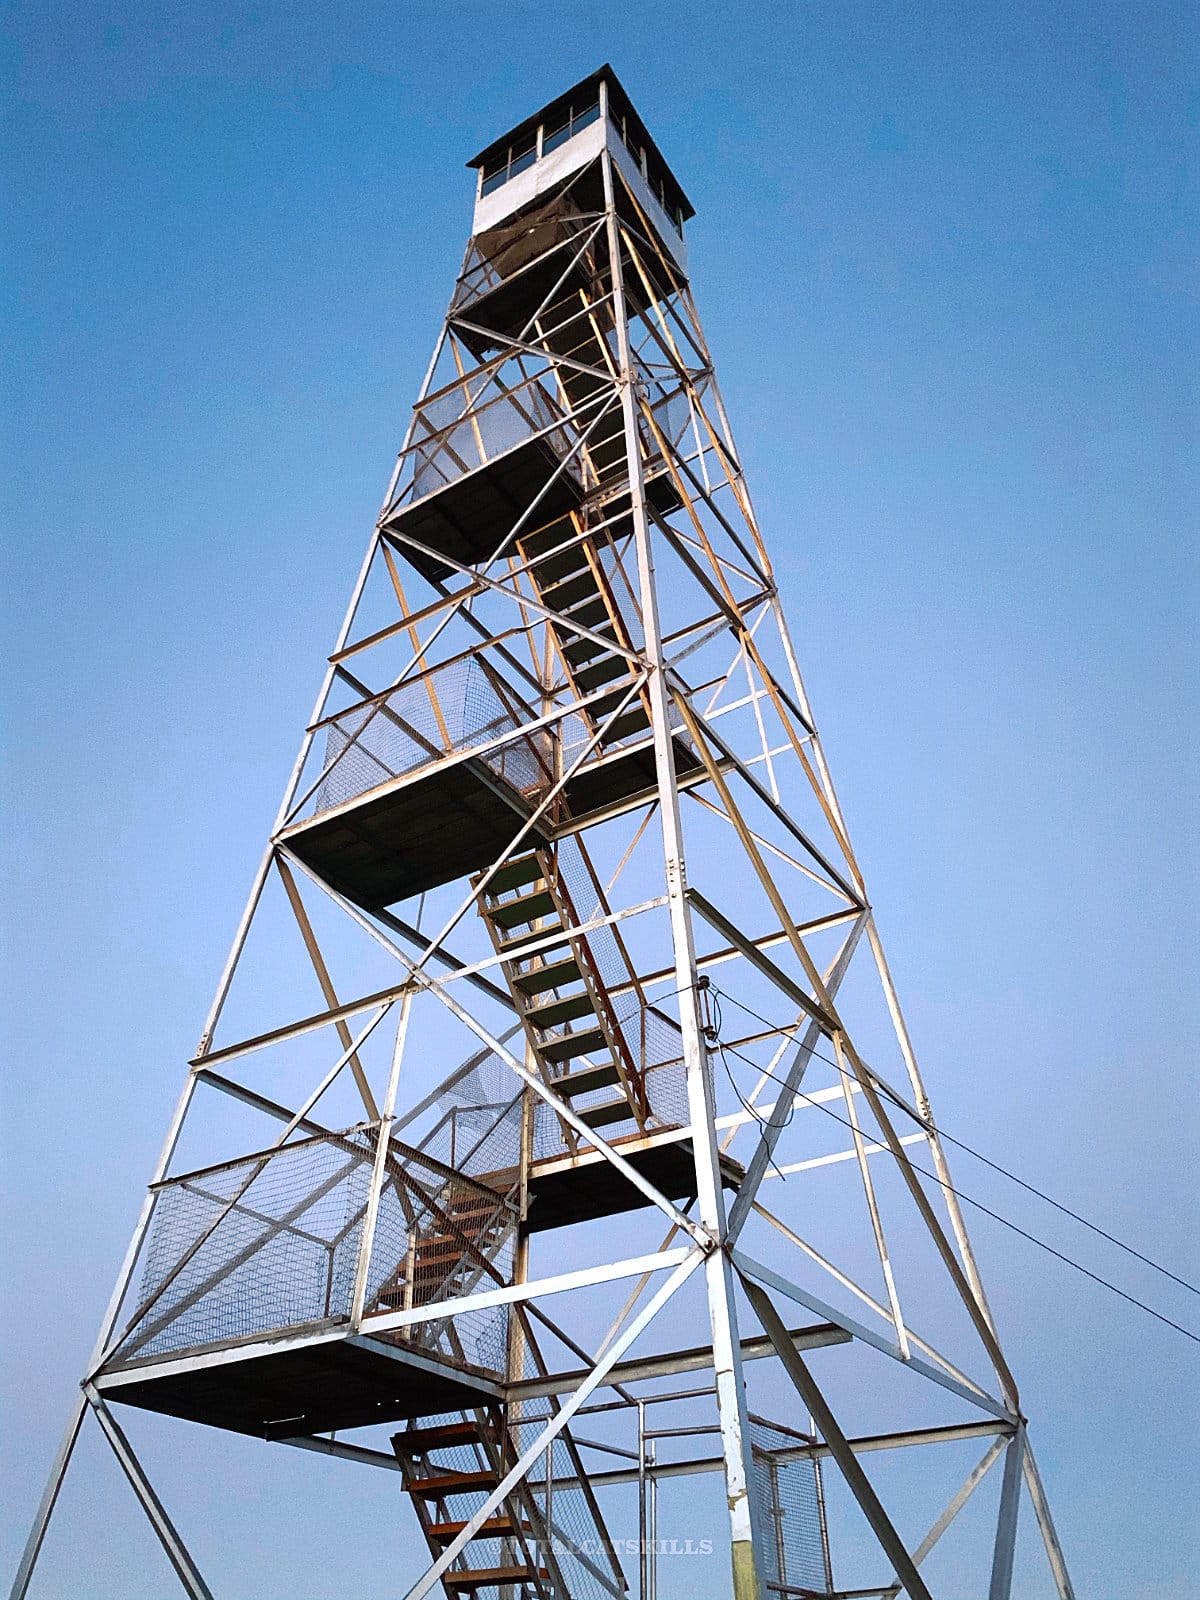 fire tower seen from directly below